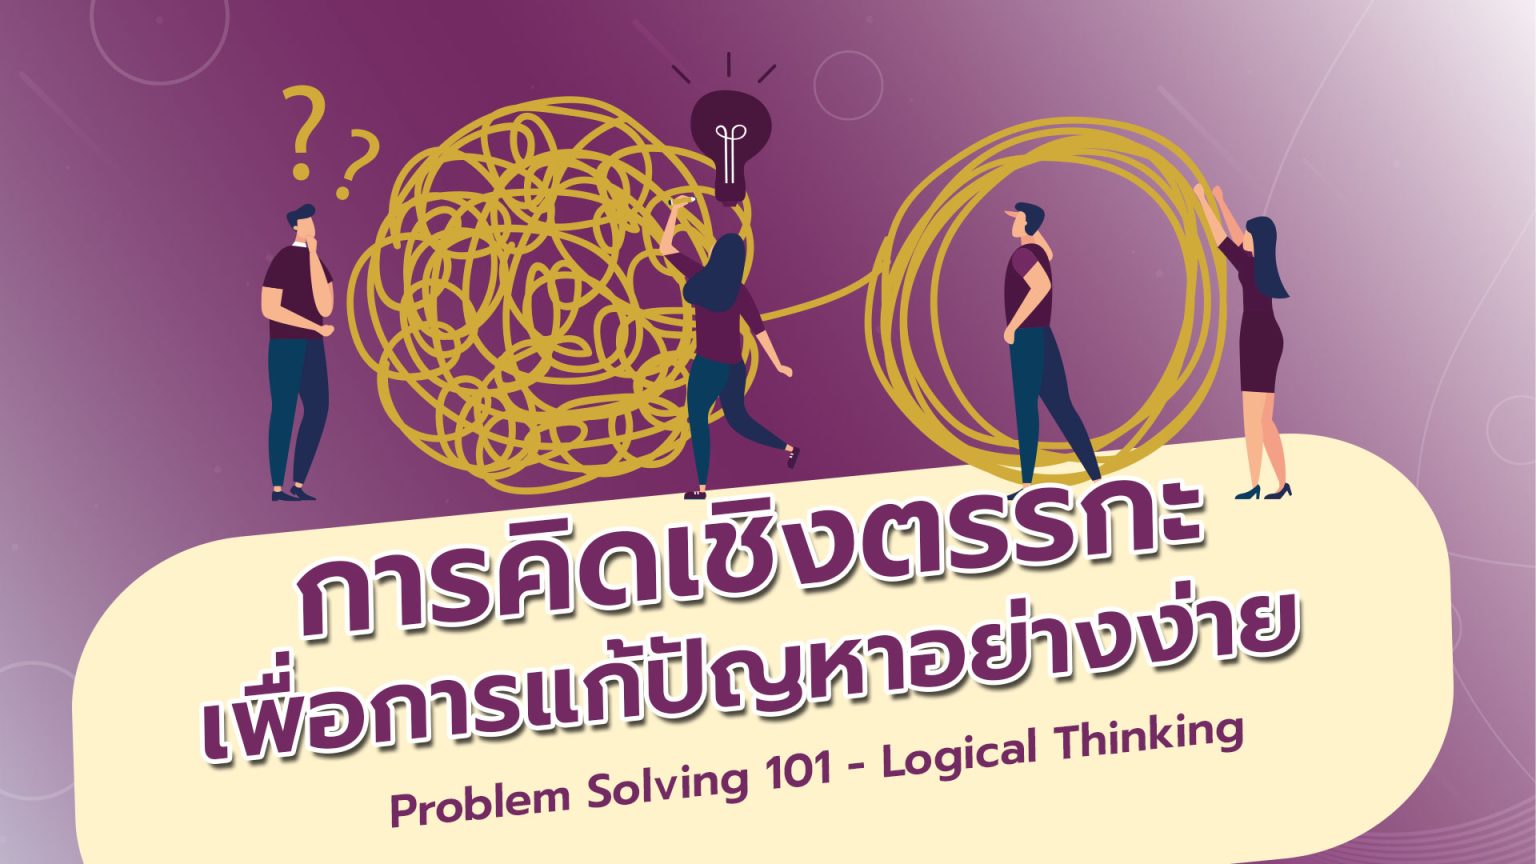 difficulty with problem solving or logical thinking